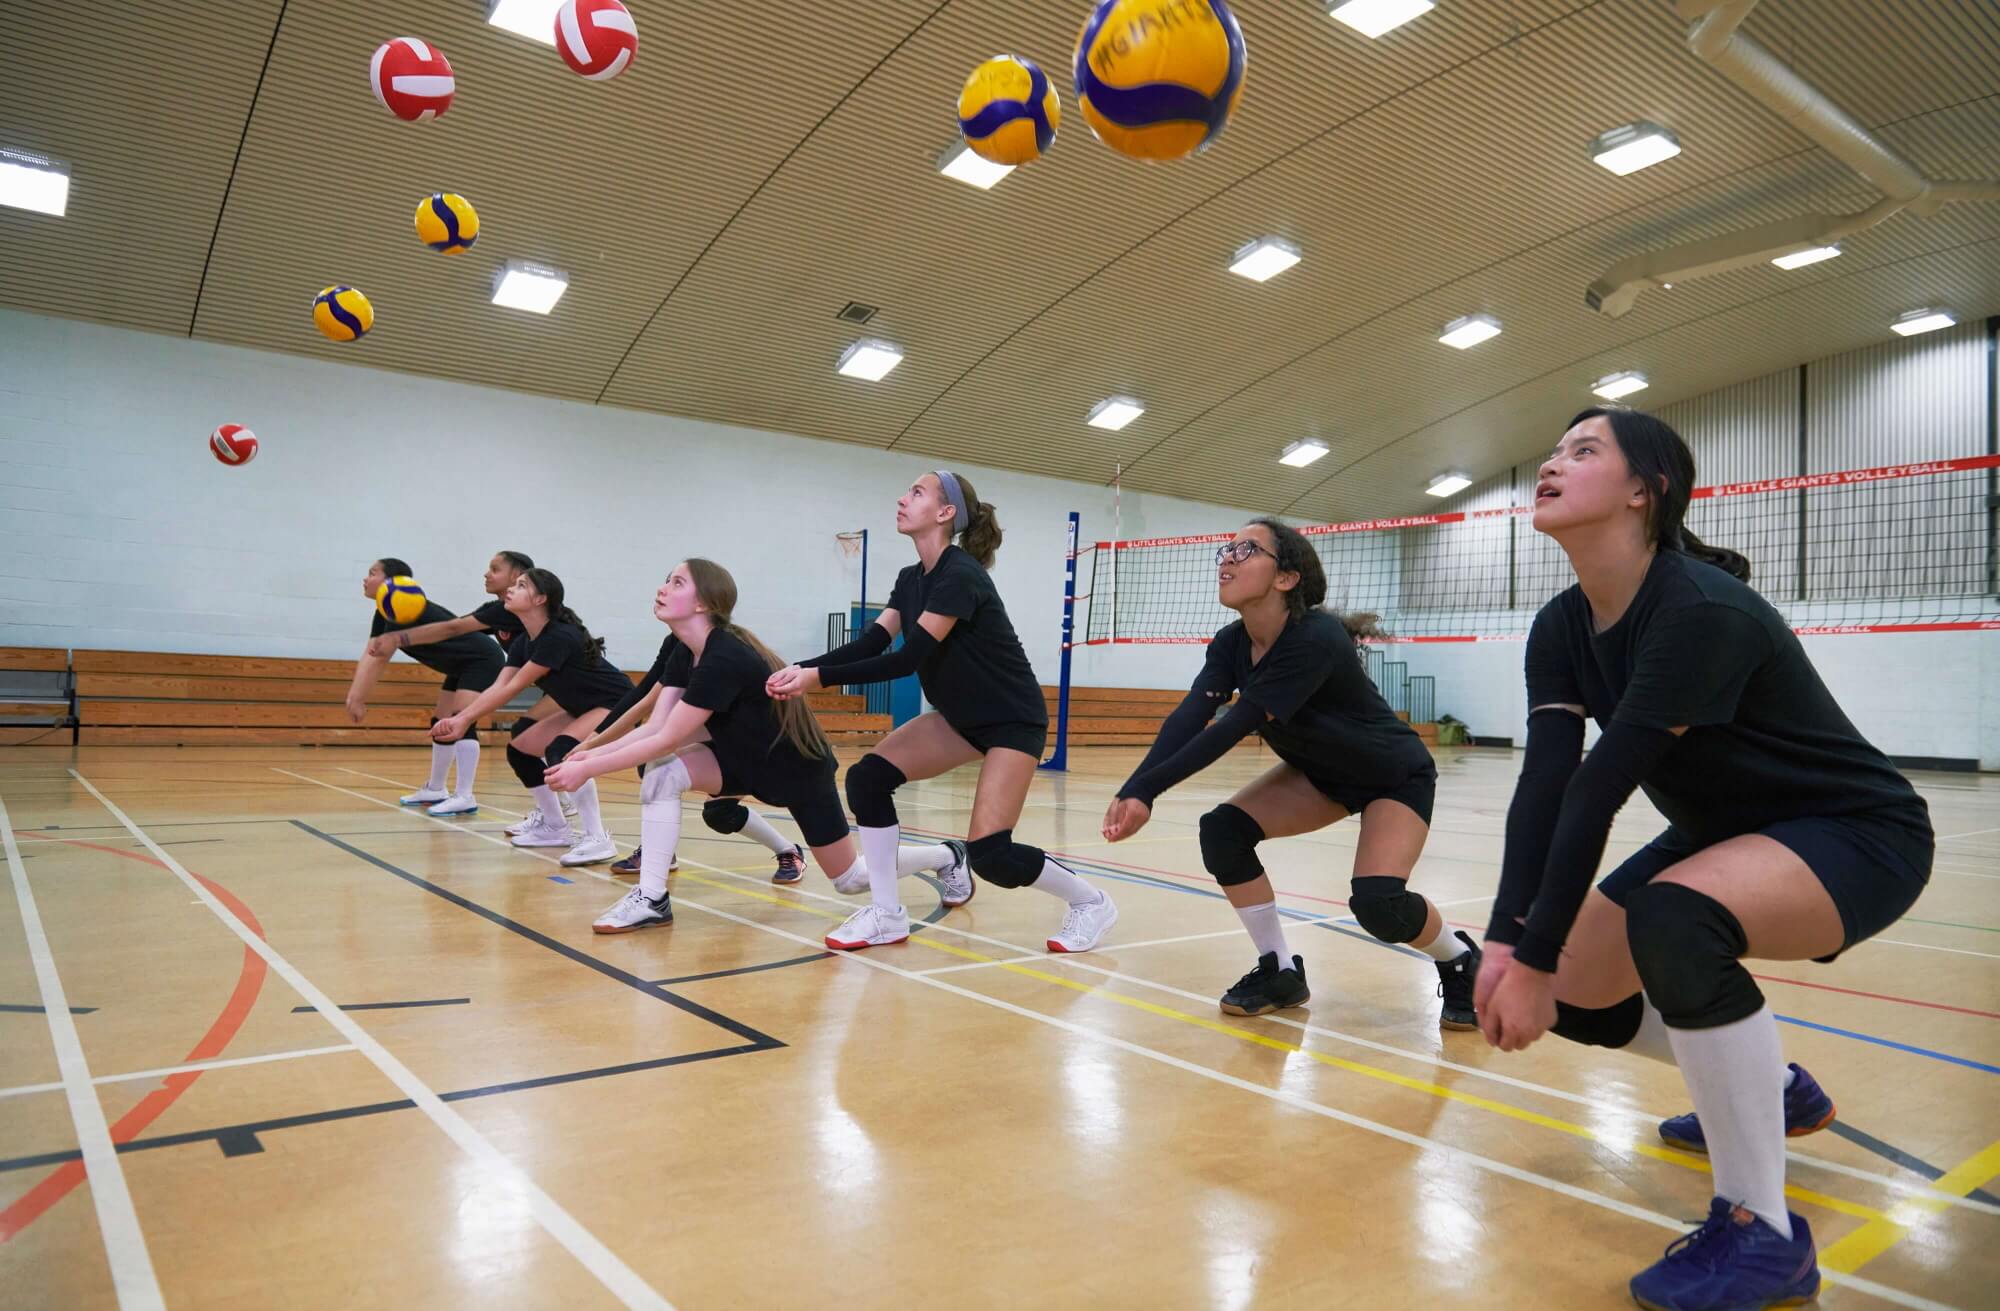 Teenagers playing volleyball in a sports hall